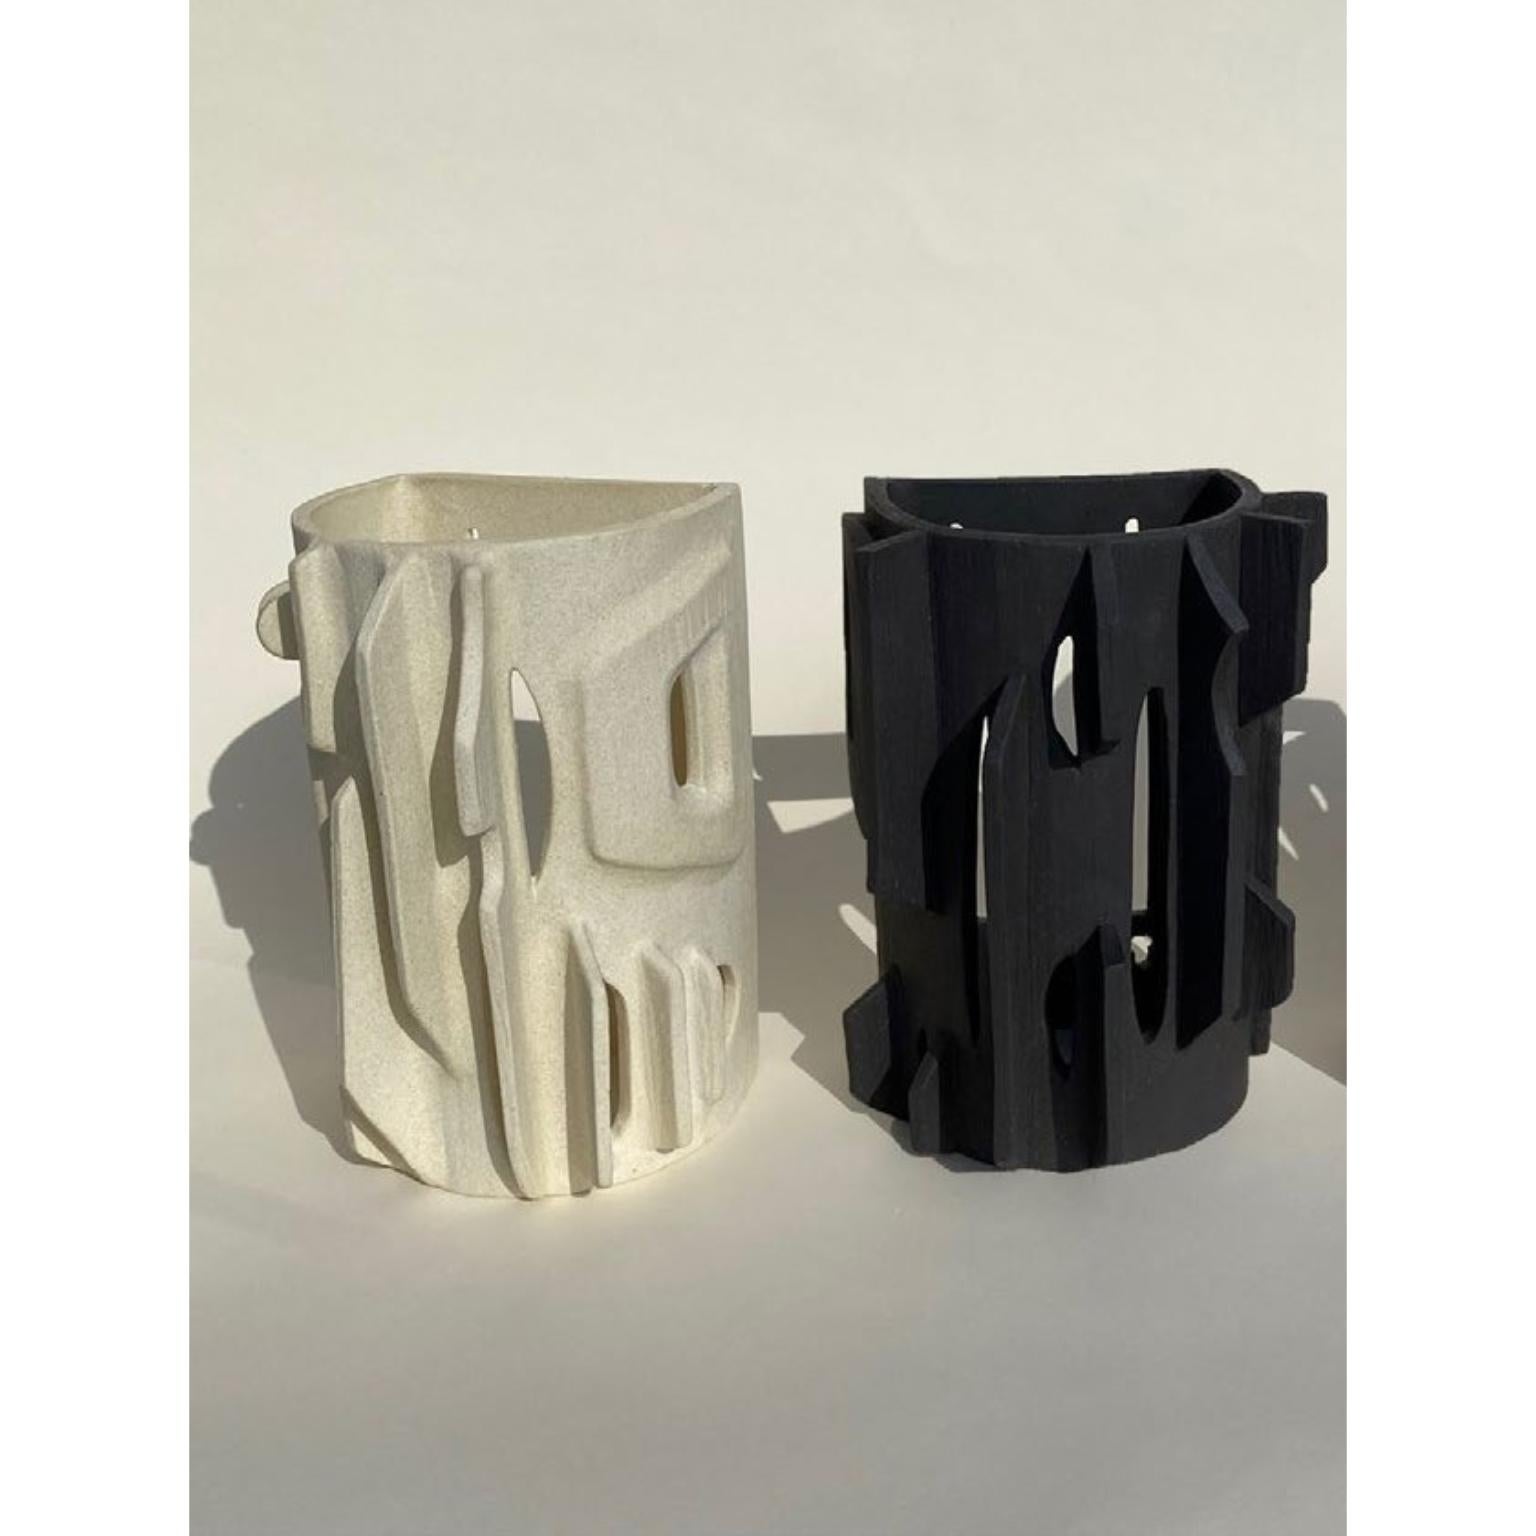 Set of 2 sconces by Olivia Cognet
Materials: Ceramic
Dimensions: L 18 cm H 27 cm

Each of Olivia’s handmade creations is a unique work of art, the snapshot of a precious moment captured in a world of fast ‘everything’.
Since moving to Los